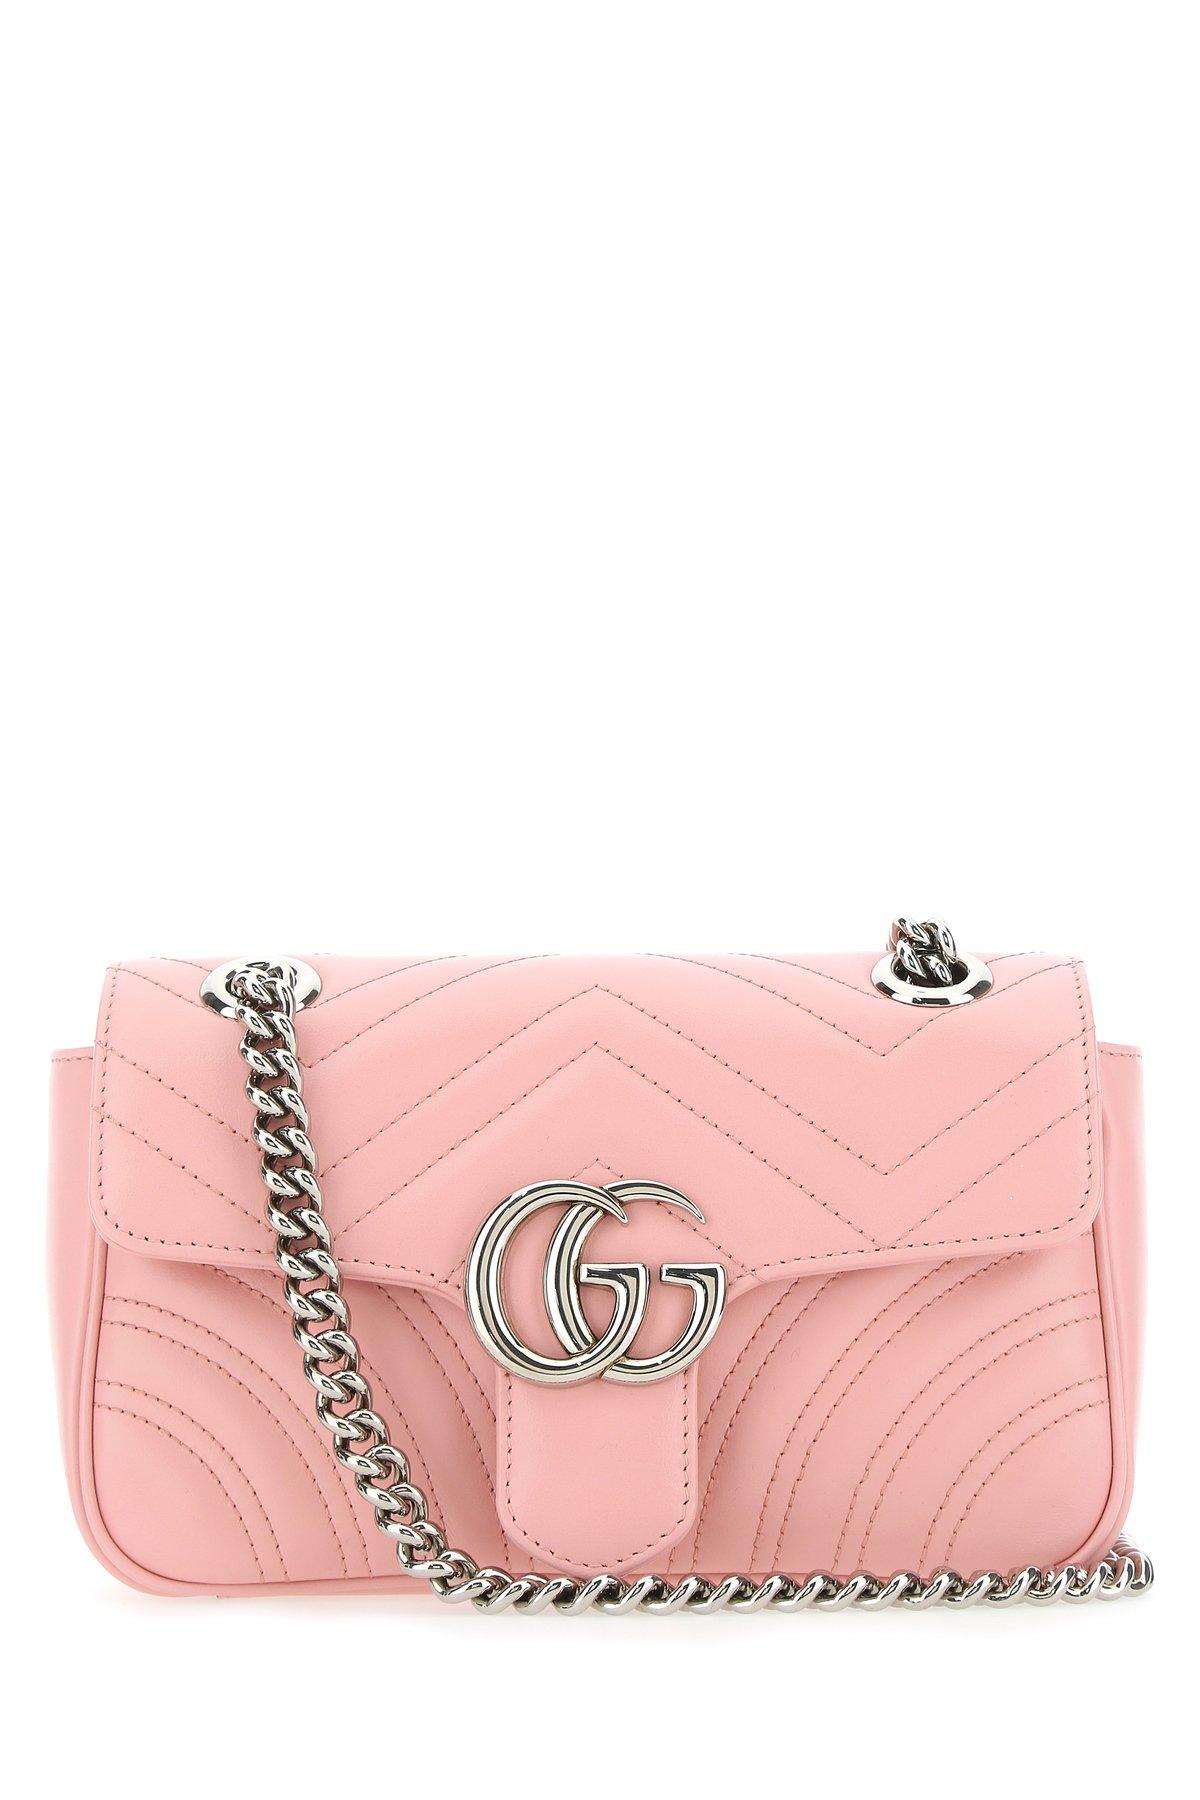 Gucci GG Marmont Small Matelasse Leather Shoulder Bag in Pink | Lyst